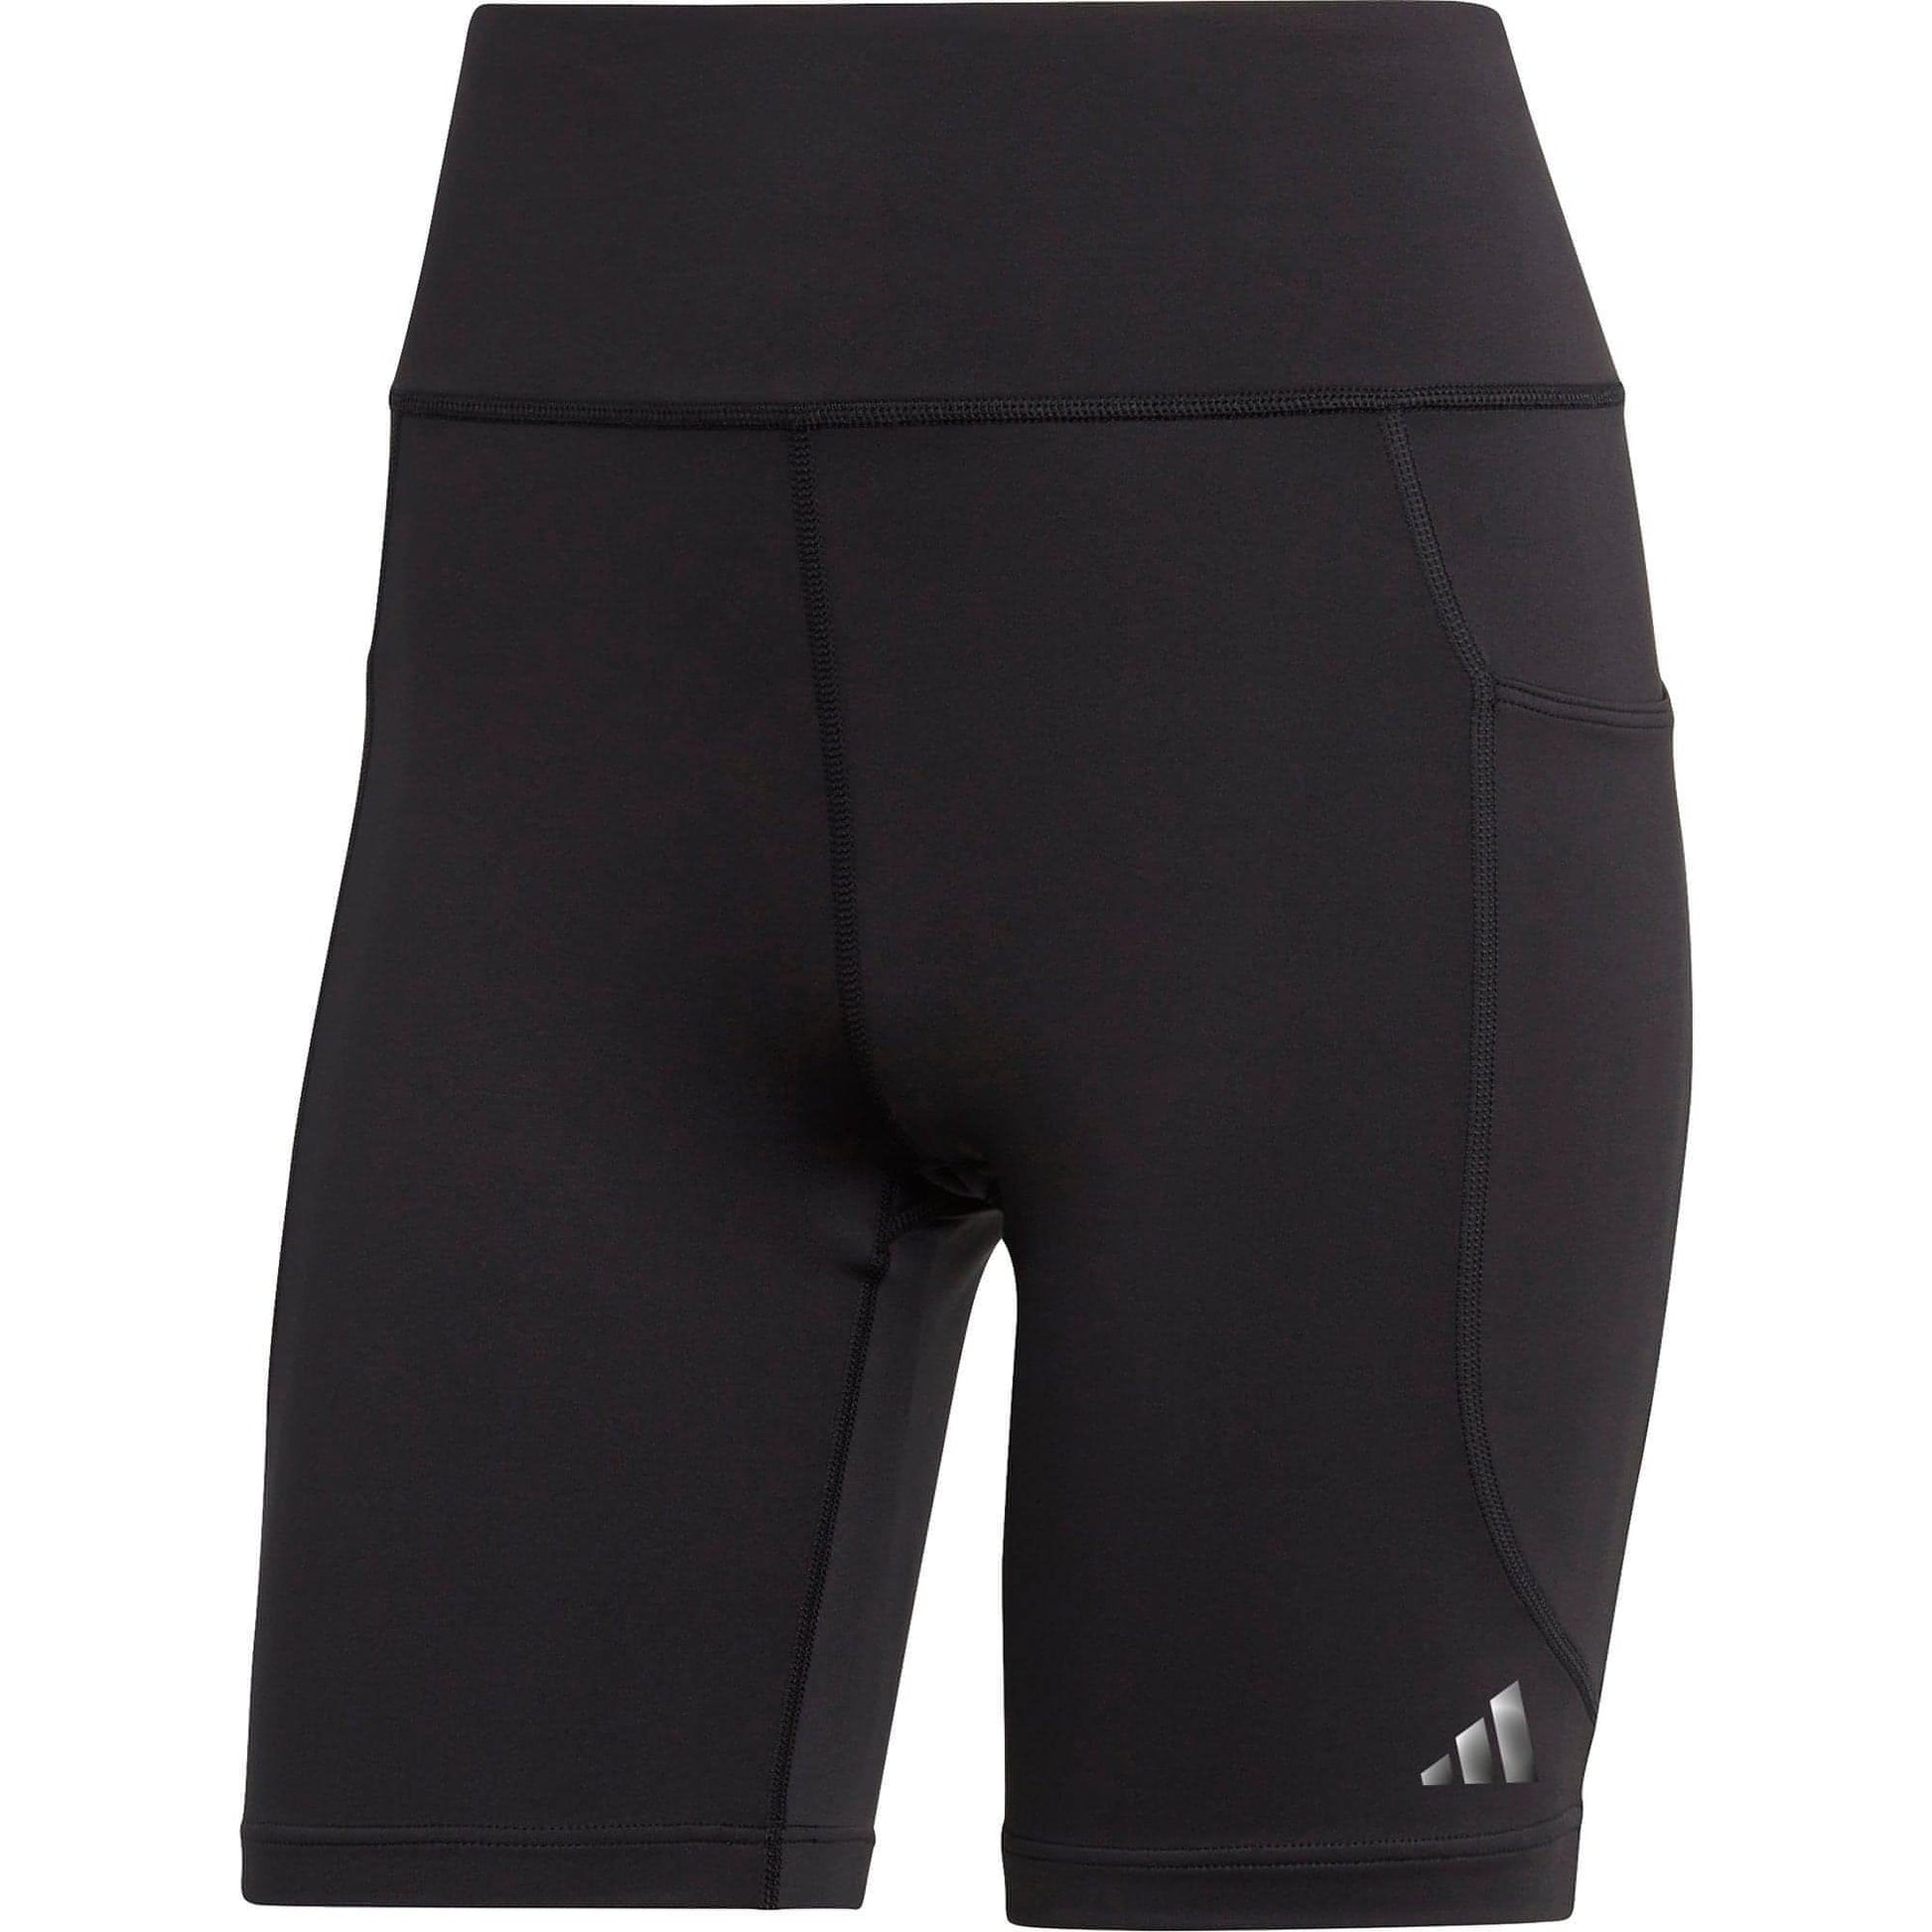 Adidas Dailyrun Inch Short Tights Hs5448 Front - Front View